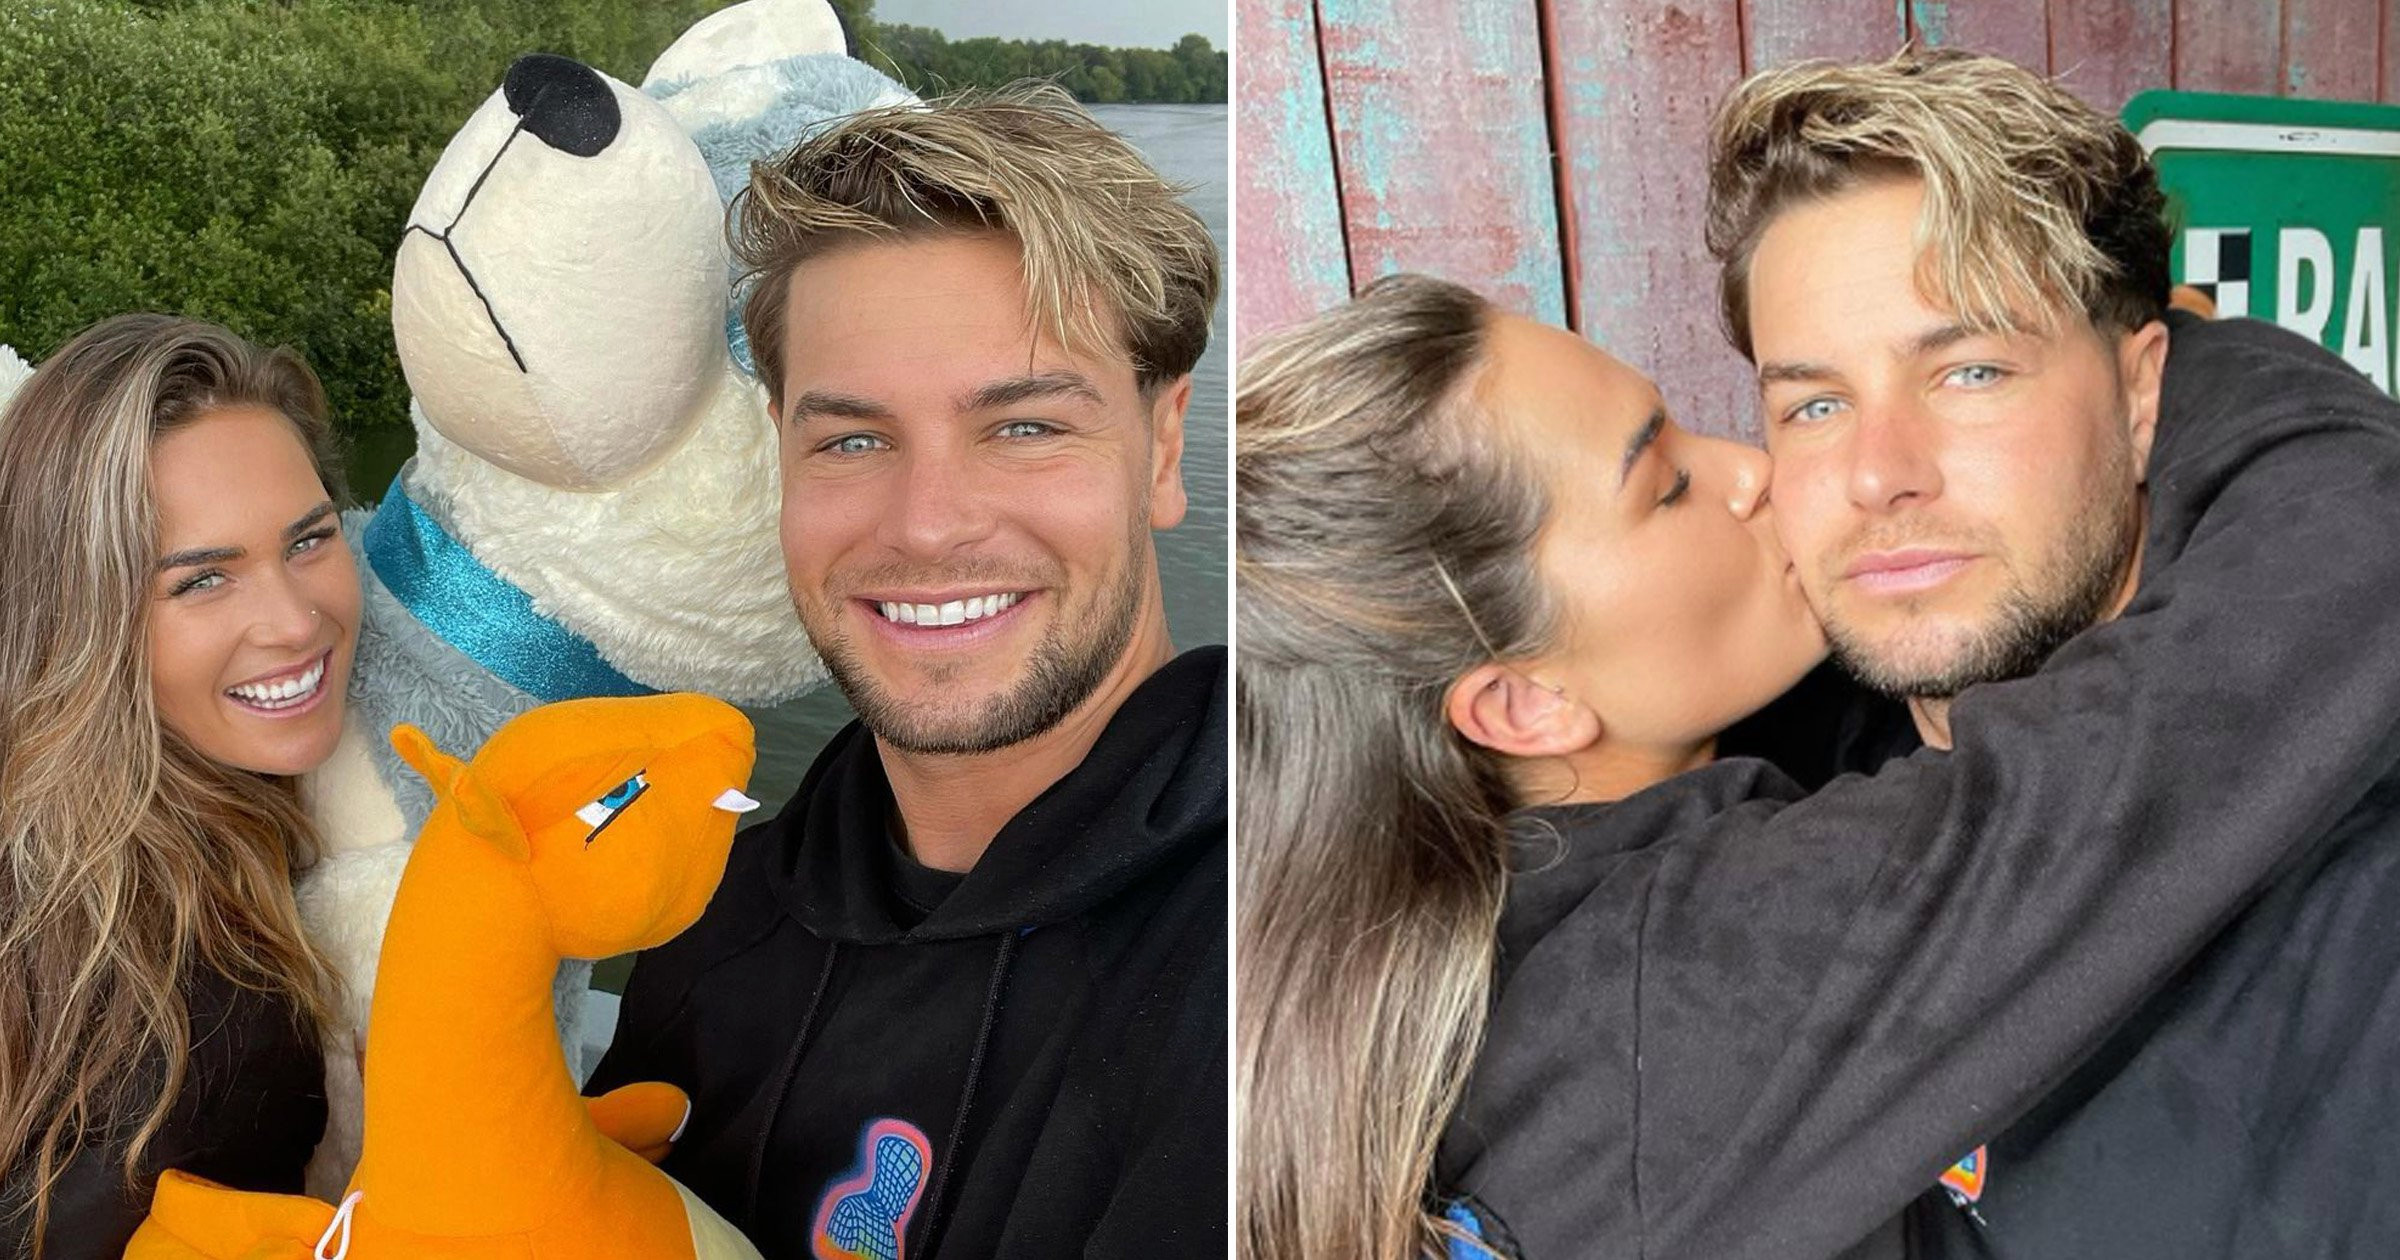 Love Island’s Chris Hughes confirms new girlfriend and says he’s ‘never had that buzz’ before